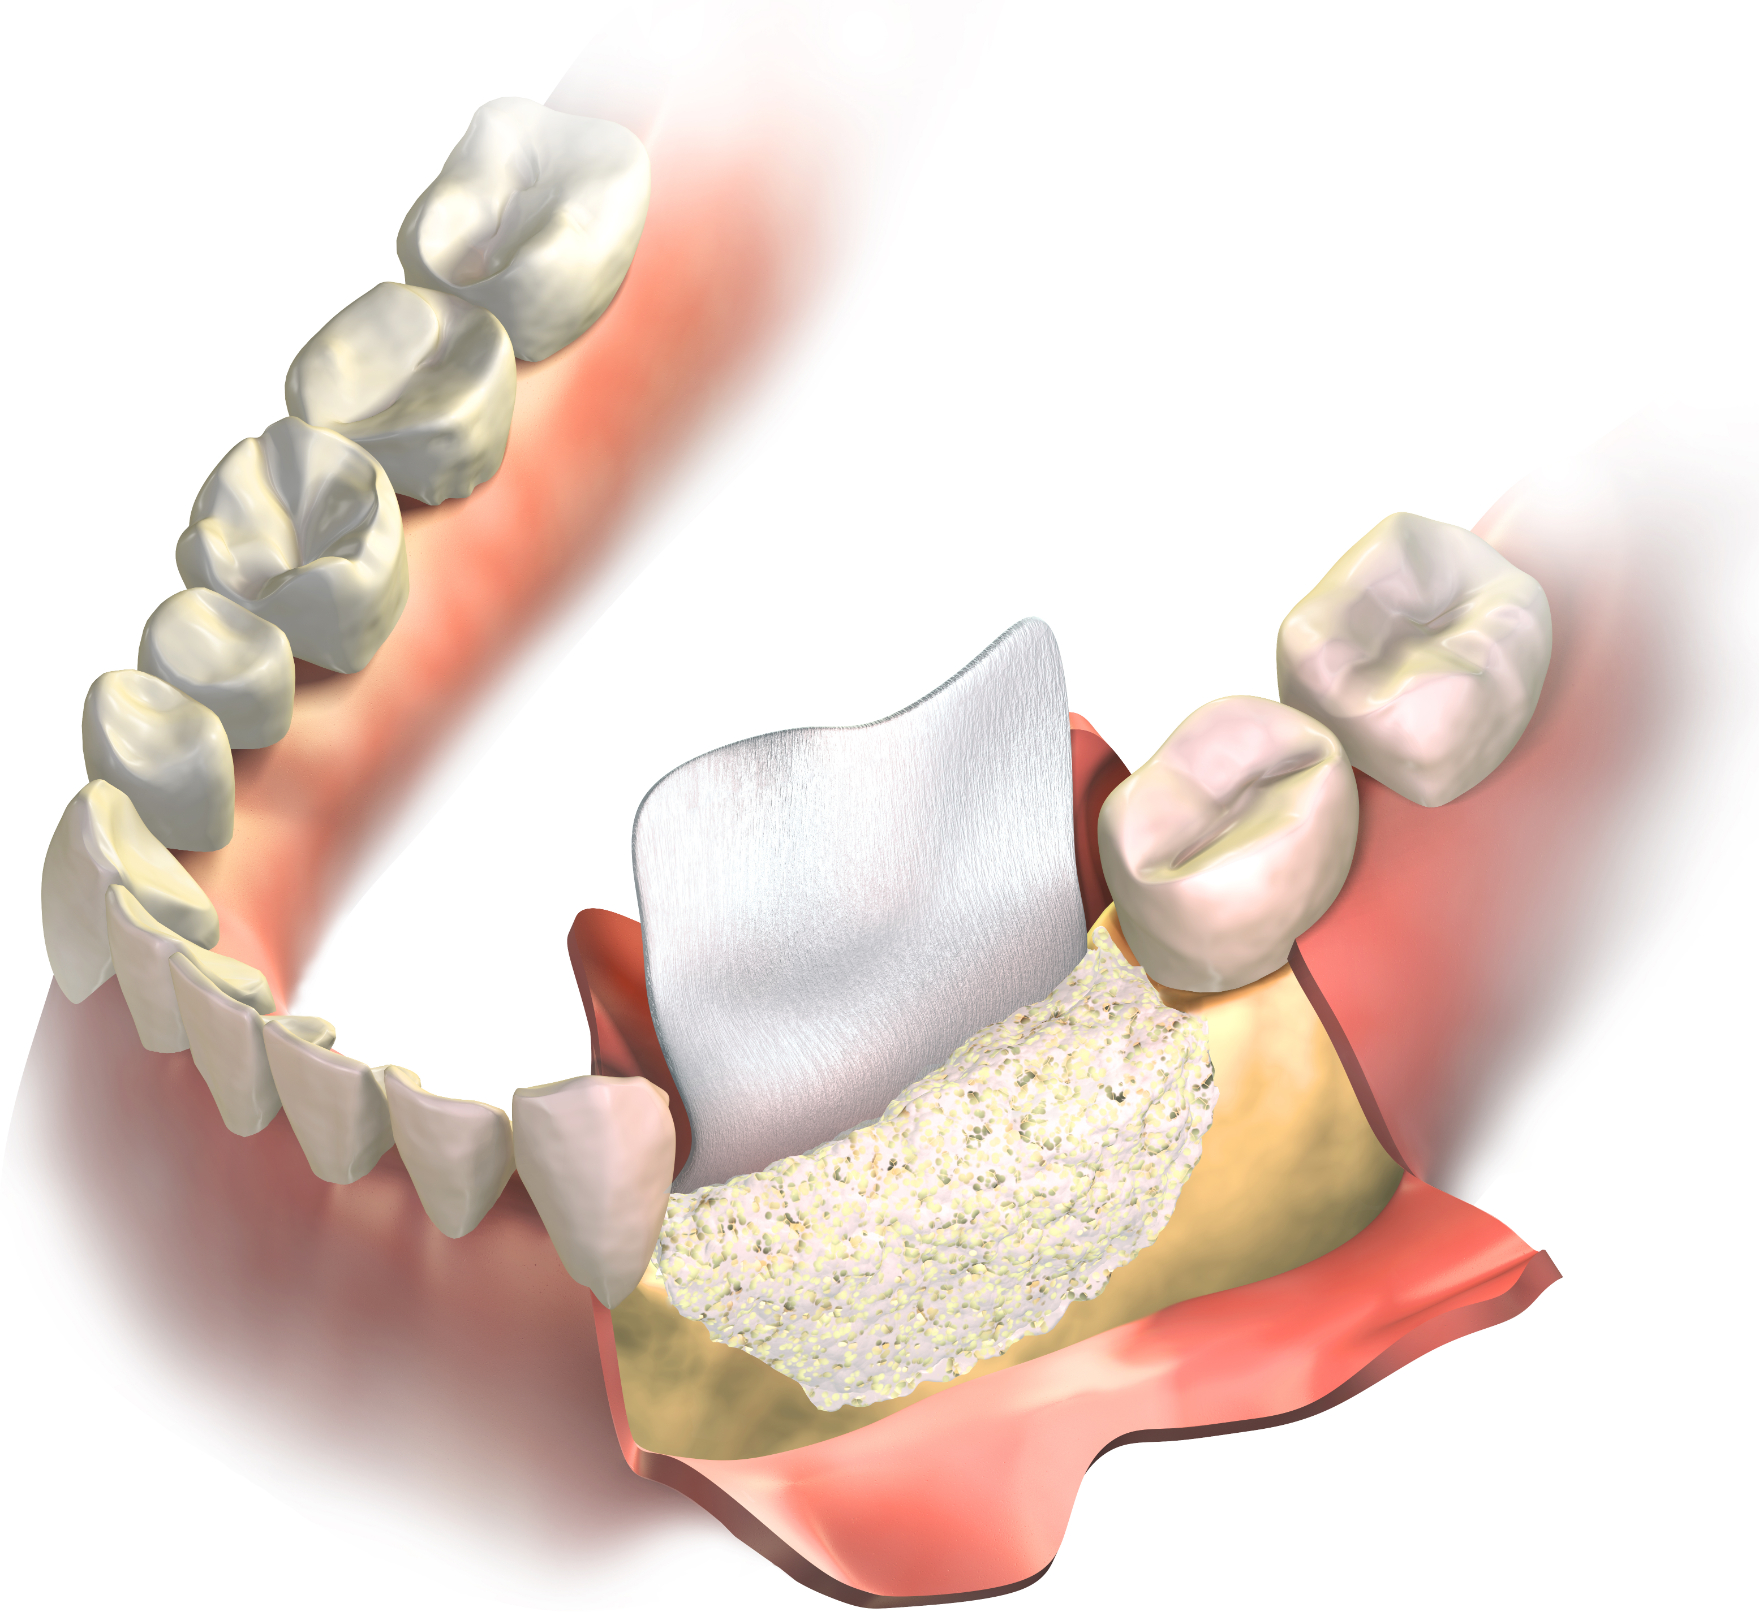  Regenerative collagen membrane placed between the gums and bone graft